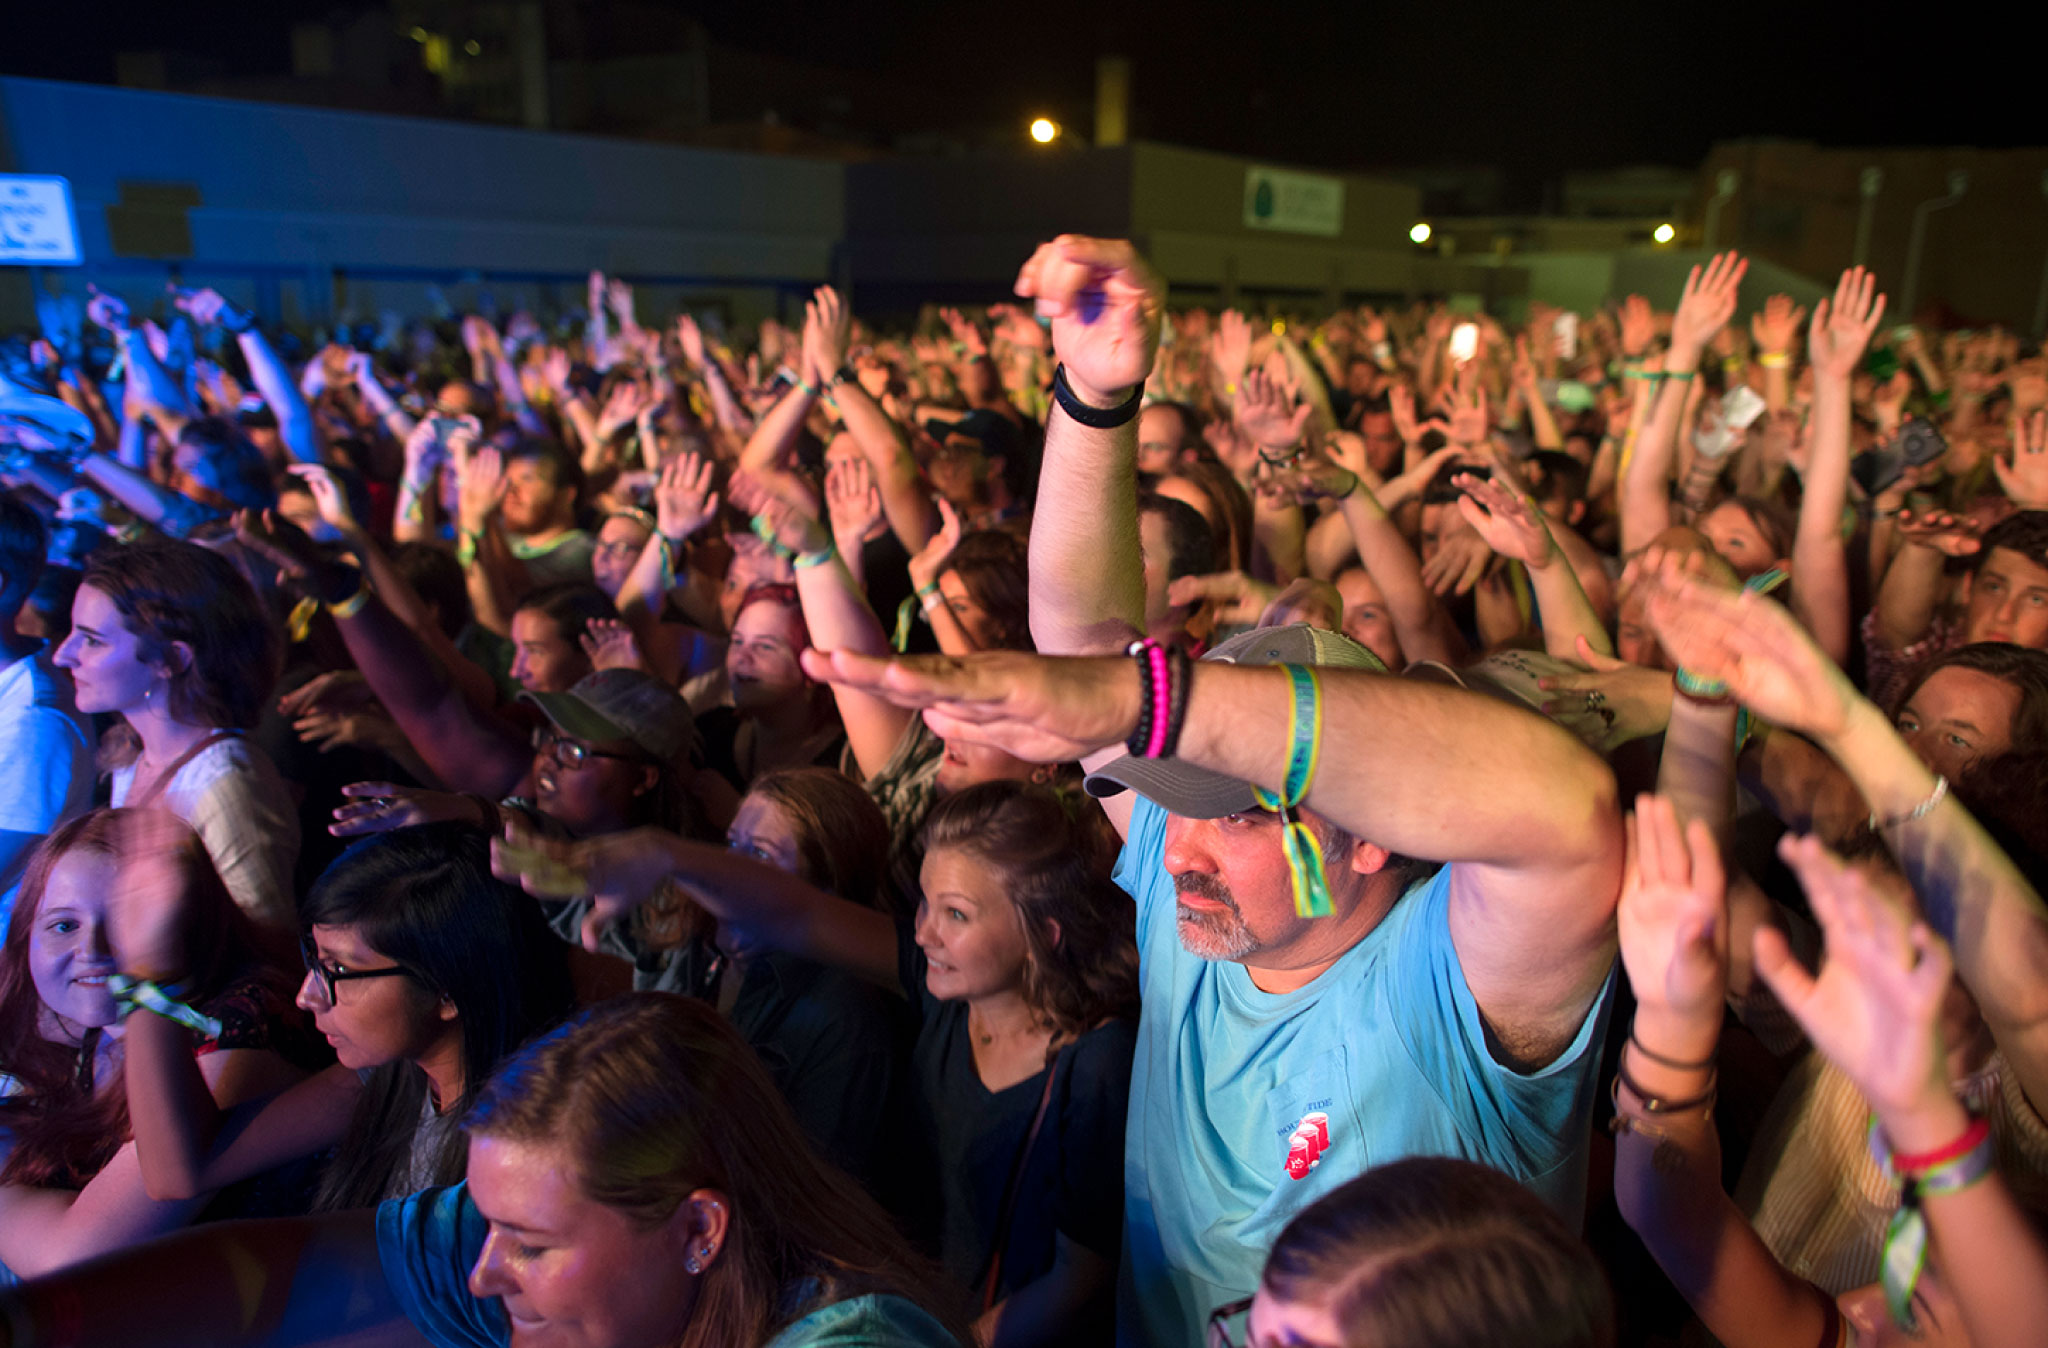 A full crowd is seen, pumping their hands to the music, looks of excitement and energy on their faces.